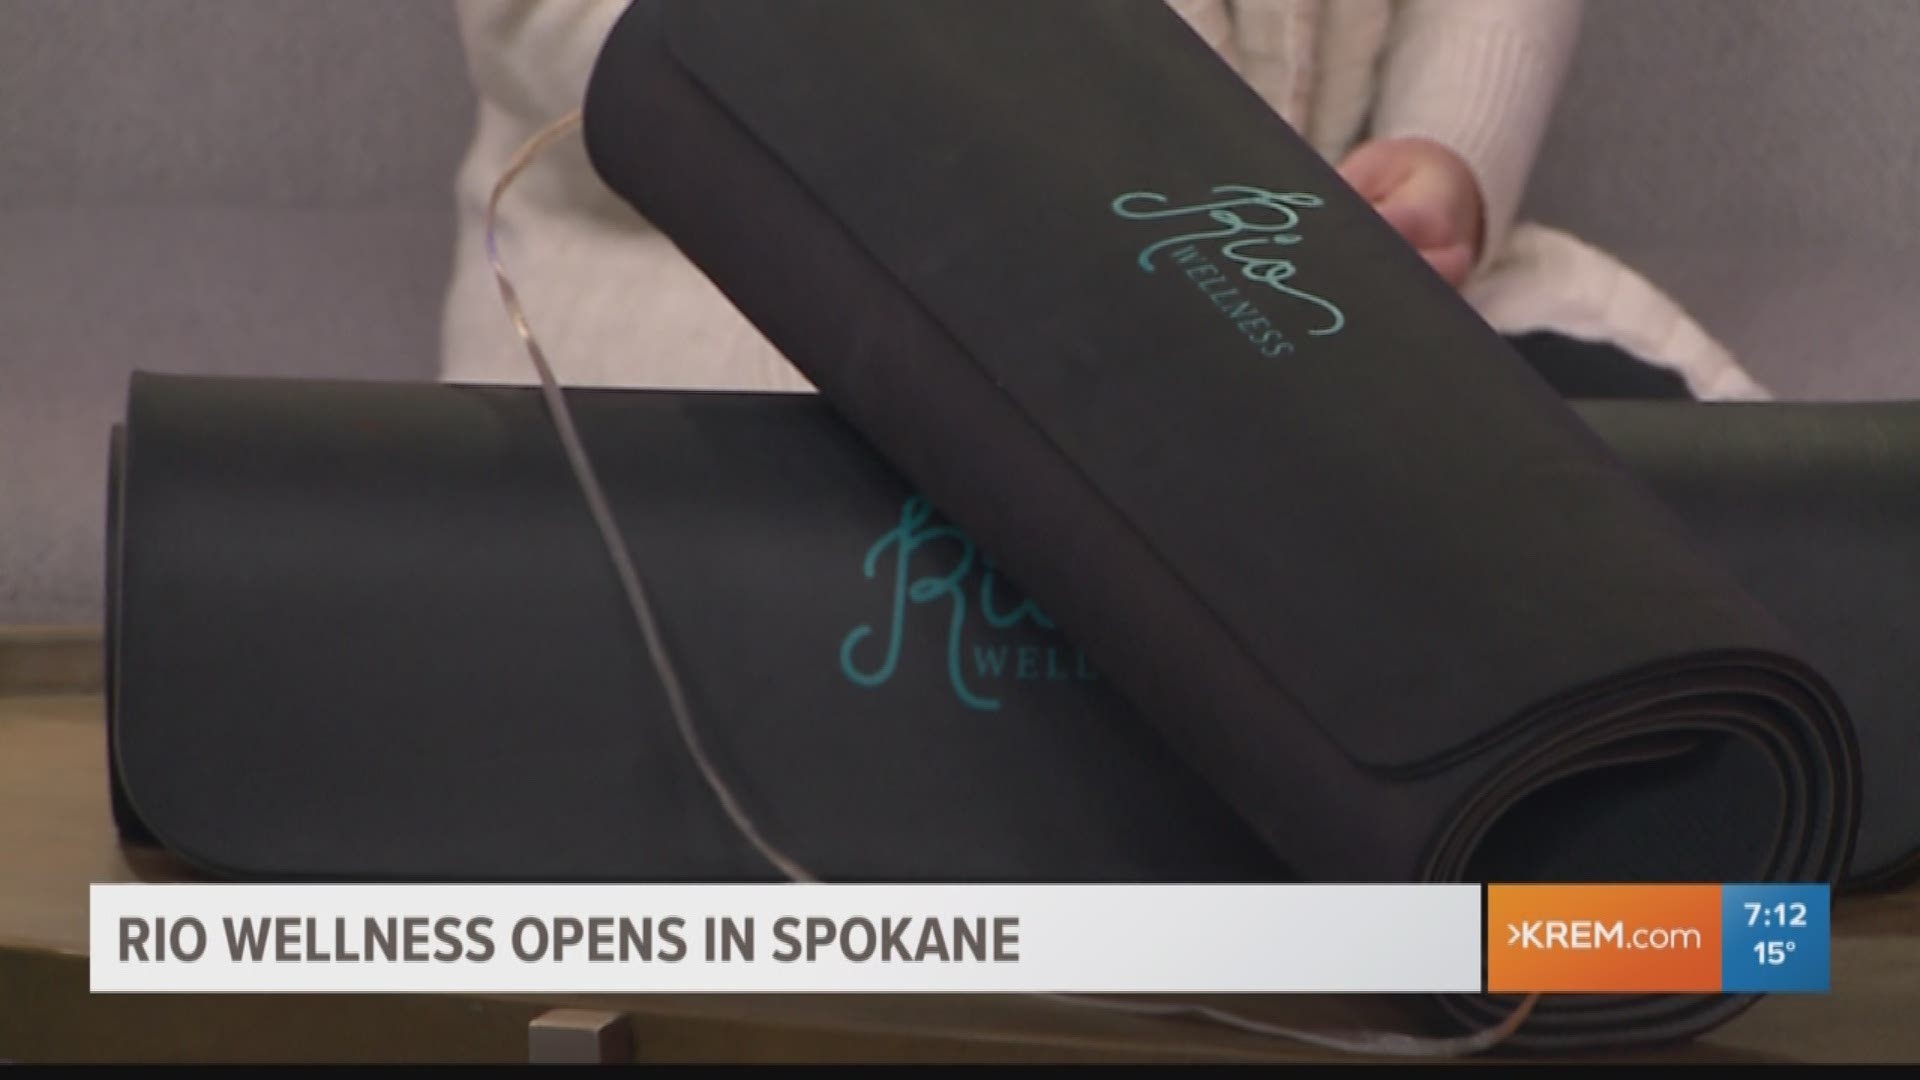 A new wellness center just opened up in Spokane.